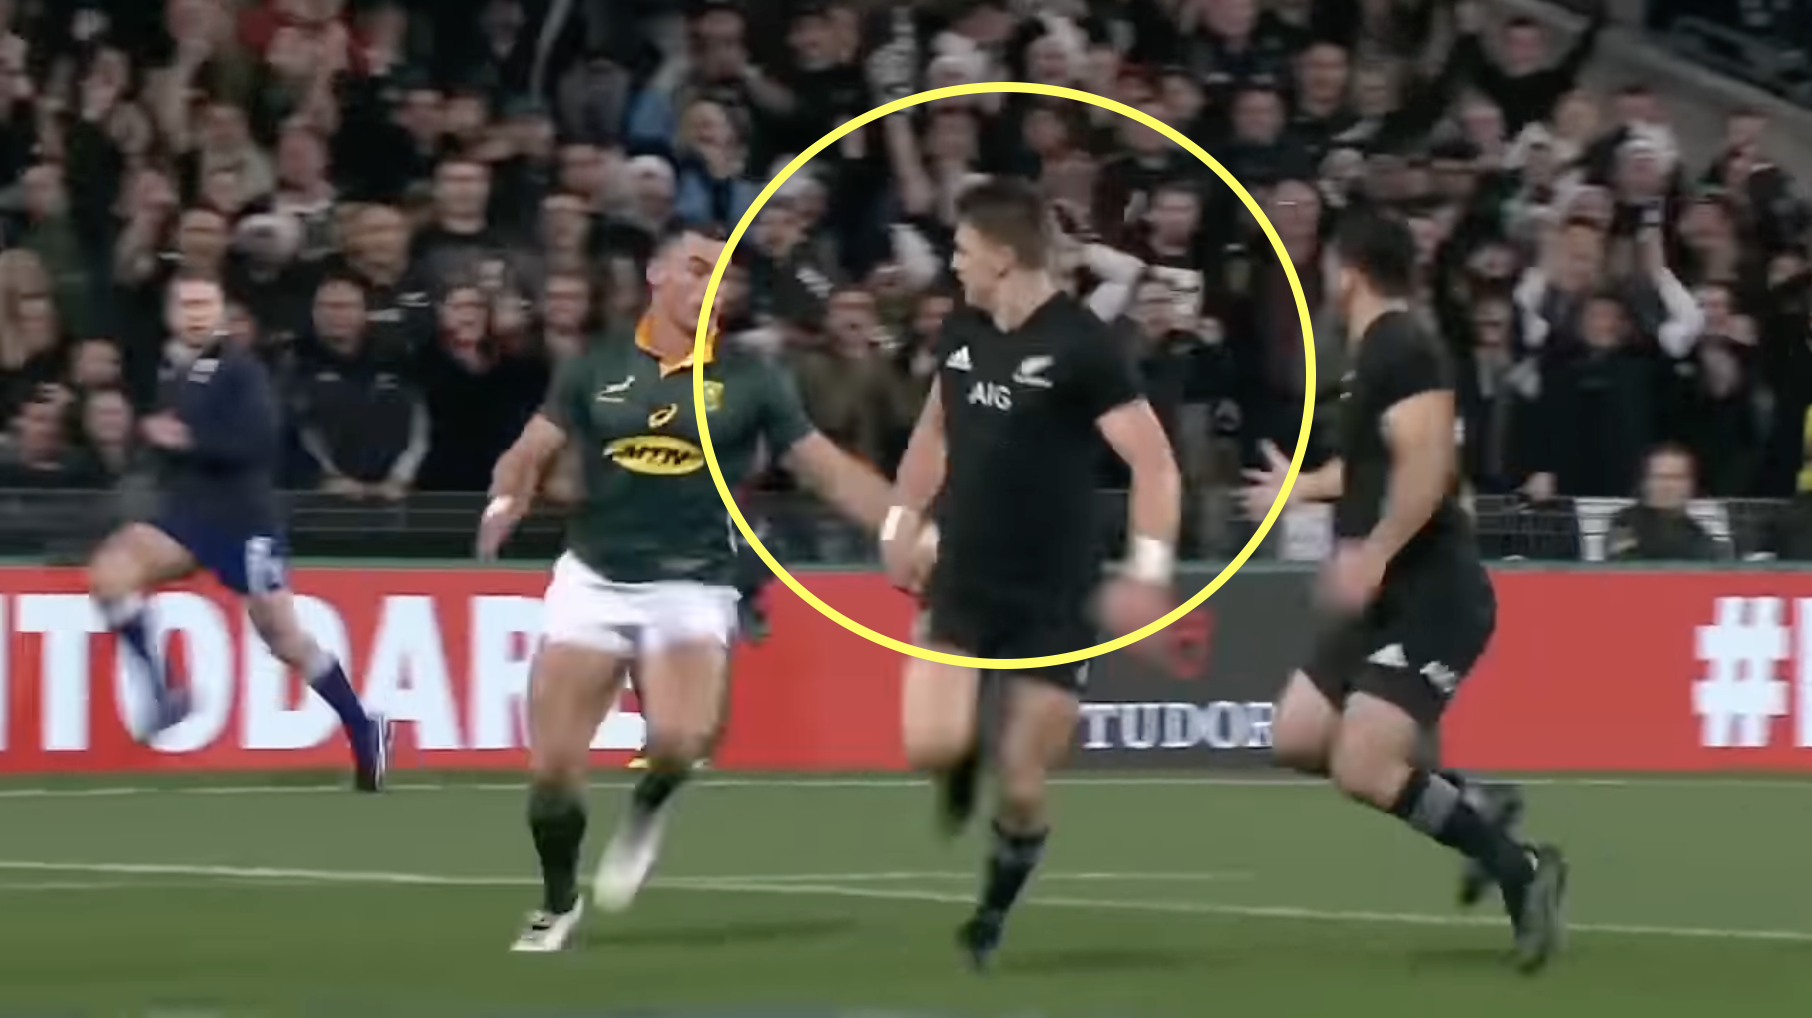 Art of passing video shows why rugby is actually the beautiful game